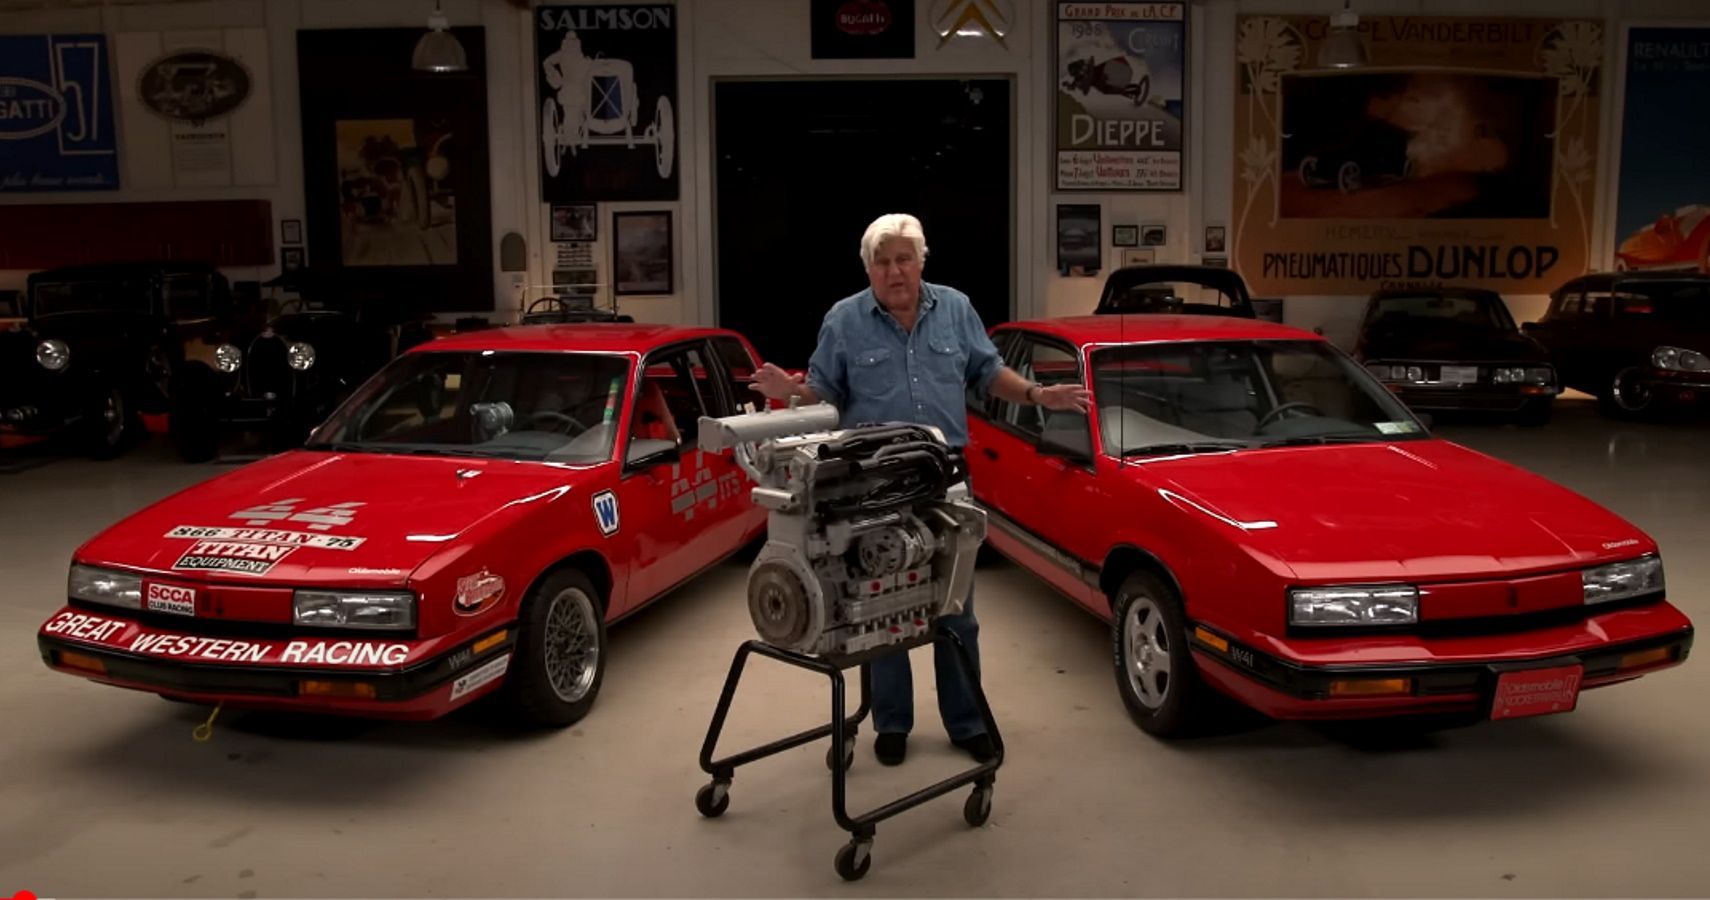 Why Jay Leno Thinks This 1991 Oldsmobile Quad 442 W-41 Is The Ultimate Sleeper